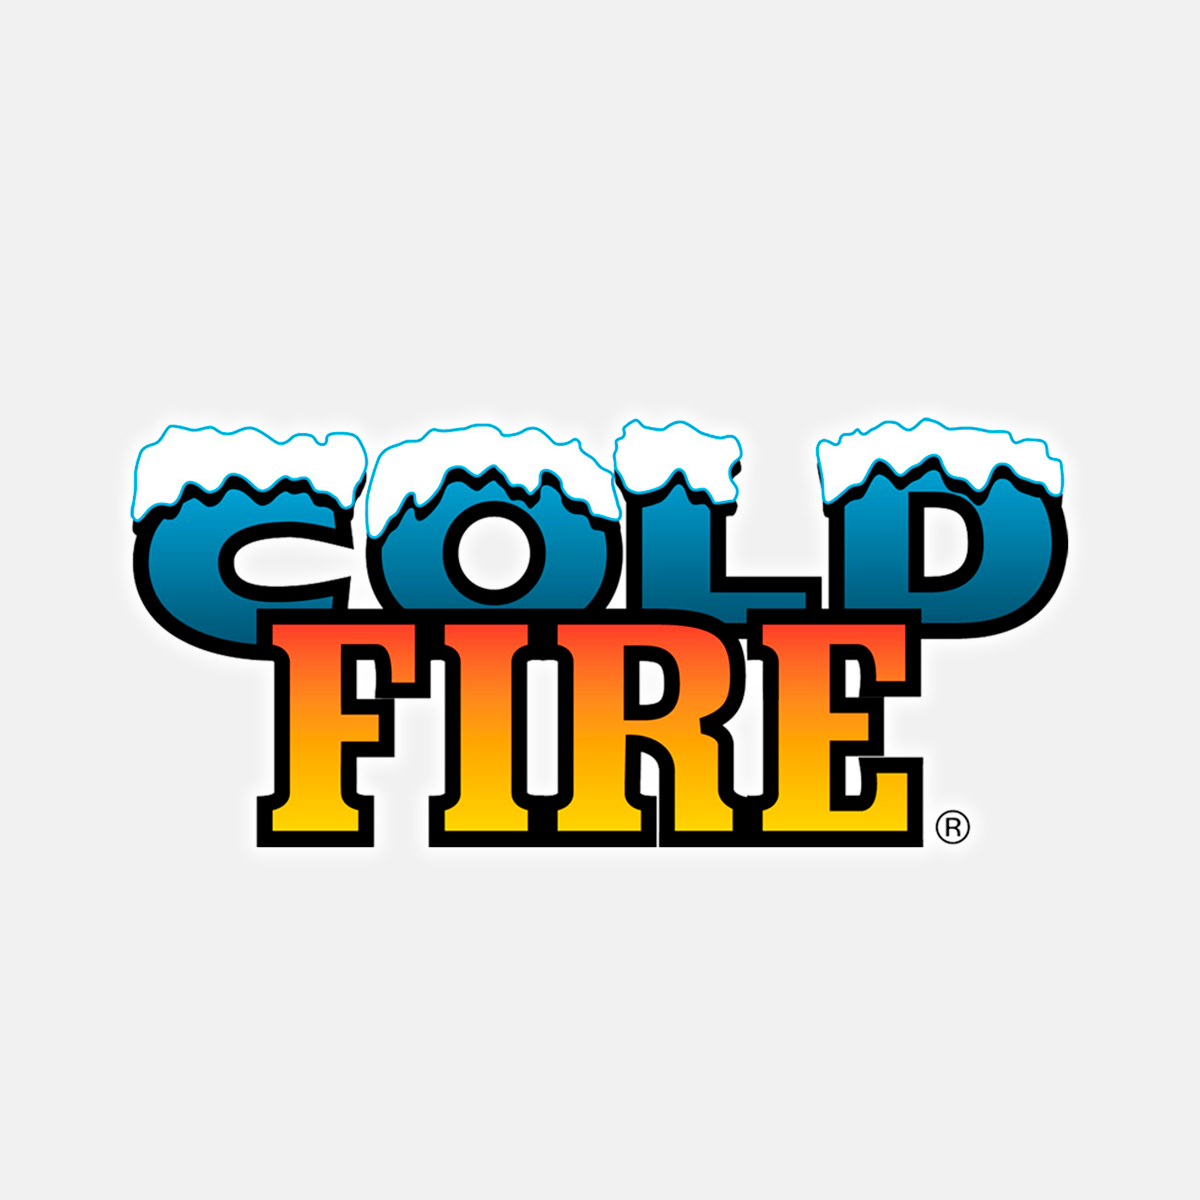 COLD FIRE